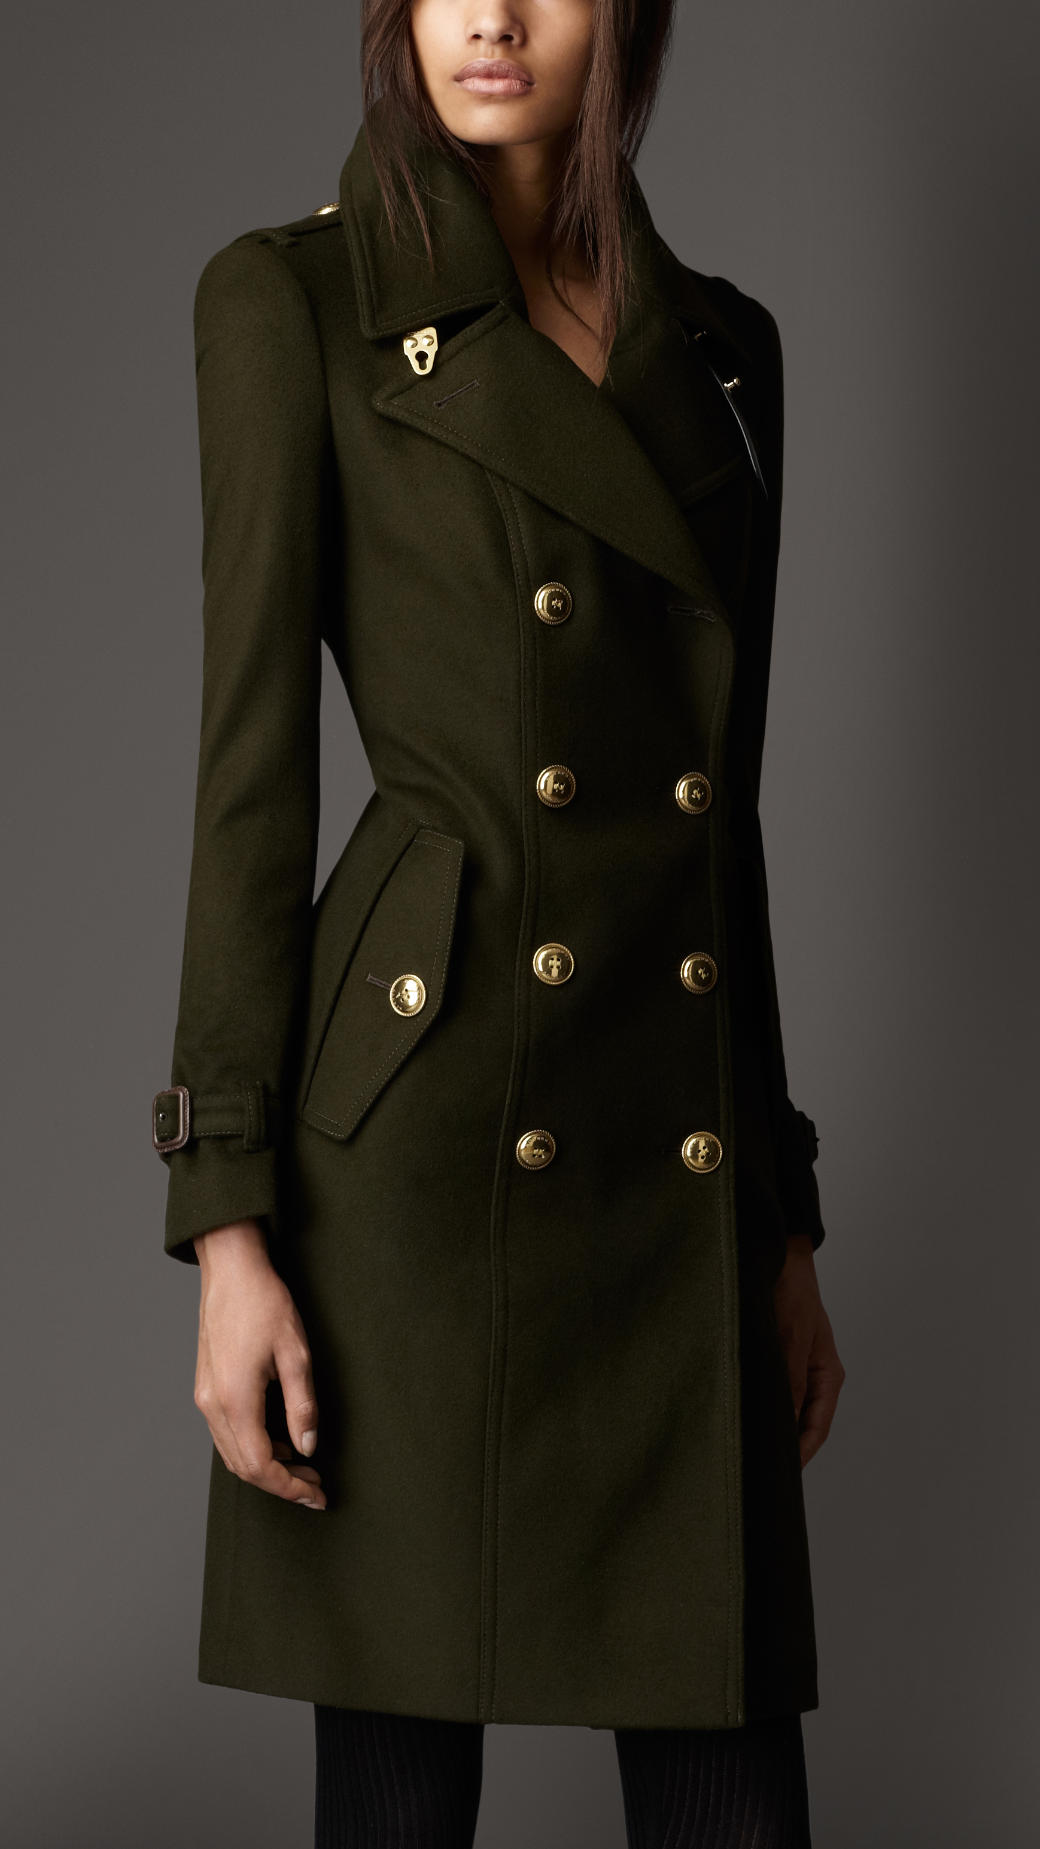 Burberry Leather Detail Wool Trench Coat in Dark Khaki Green (Green) - Lyst